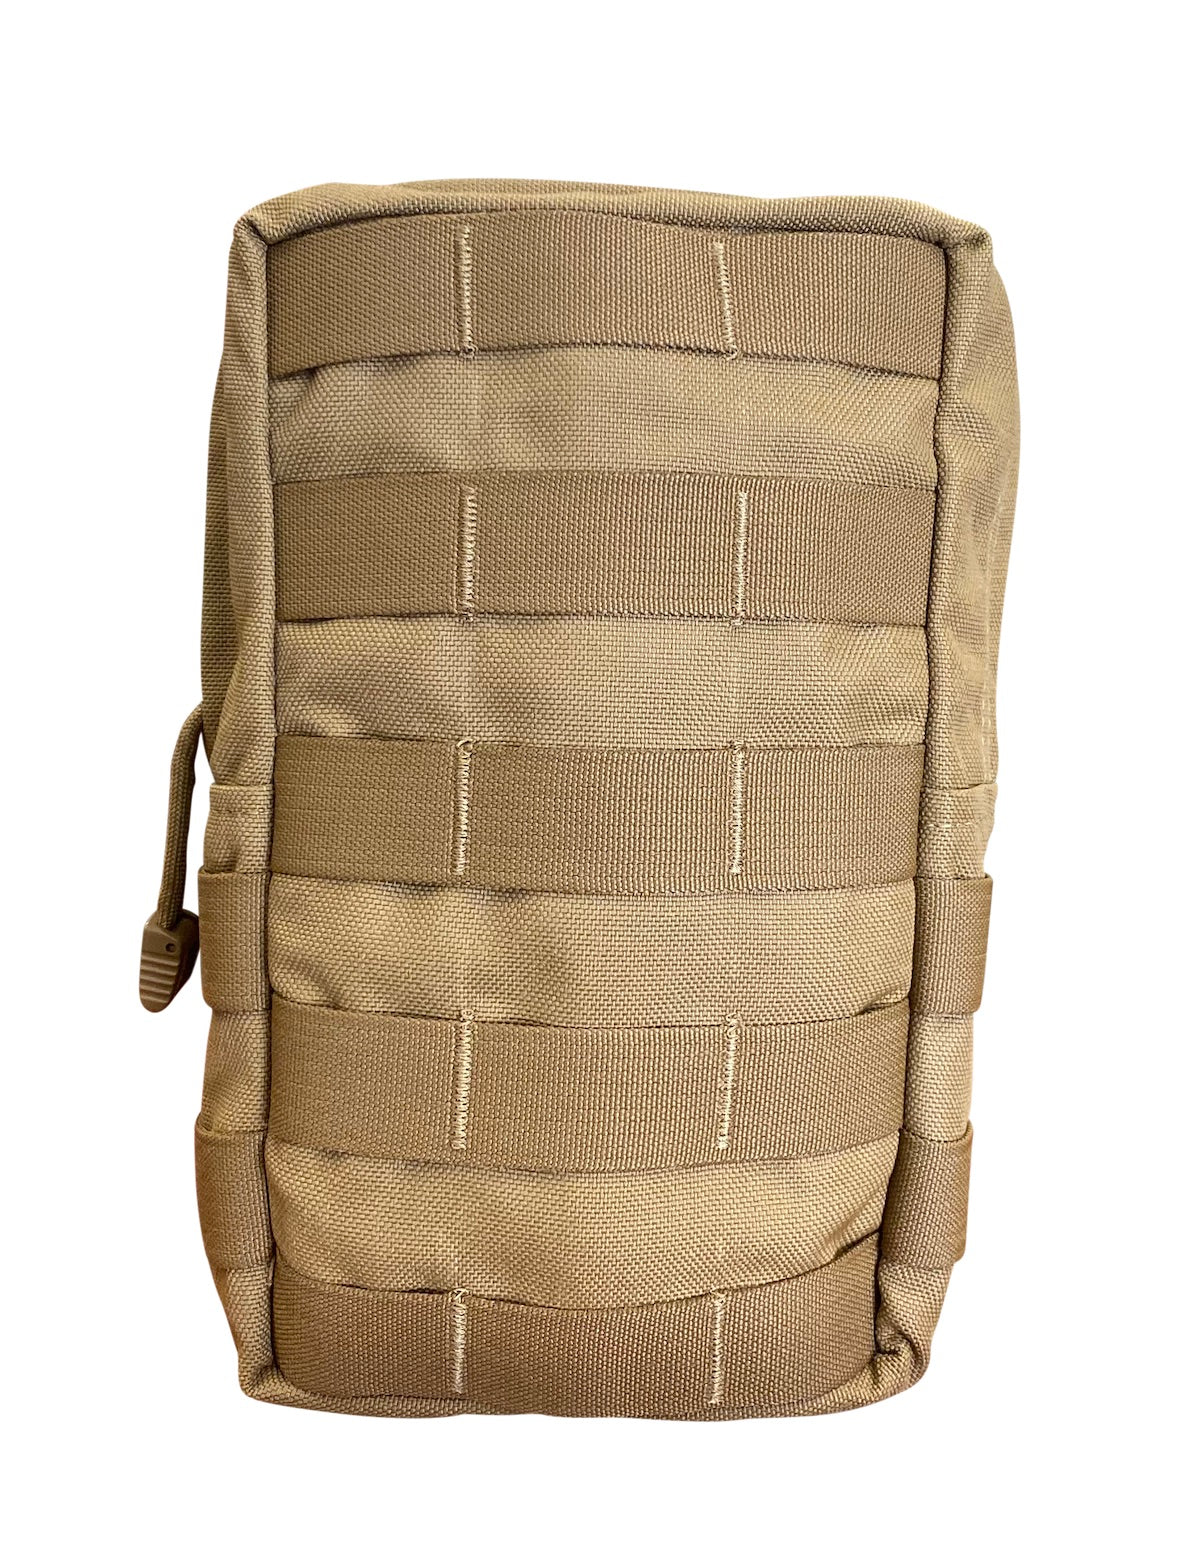 Large 6x10x3 General Purpose Pouch – BDS Tactical Gear